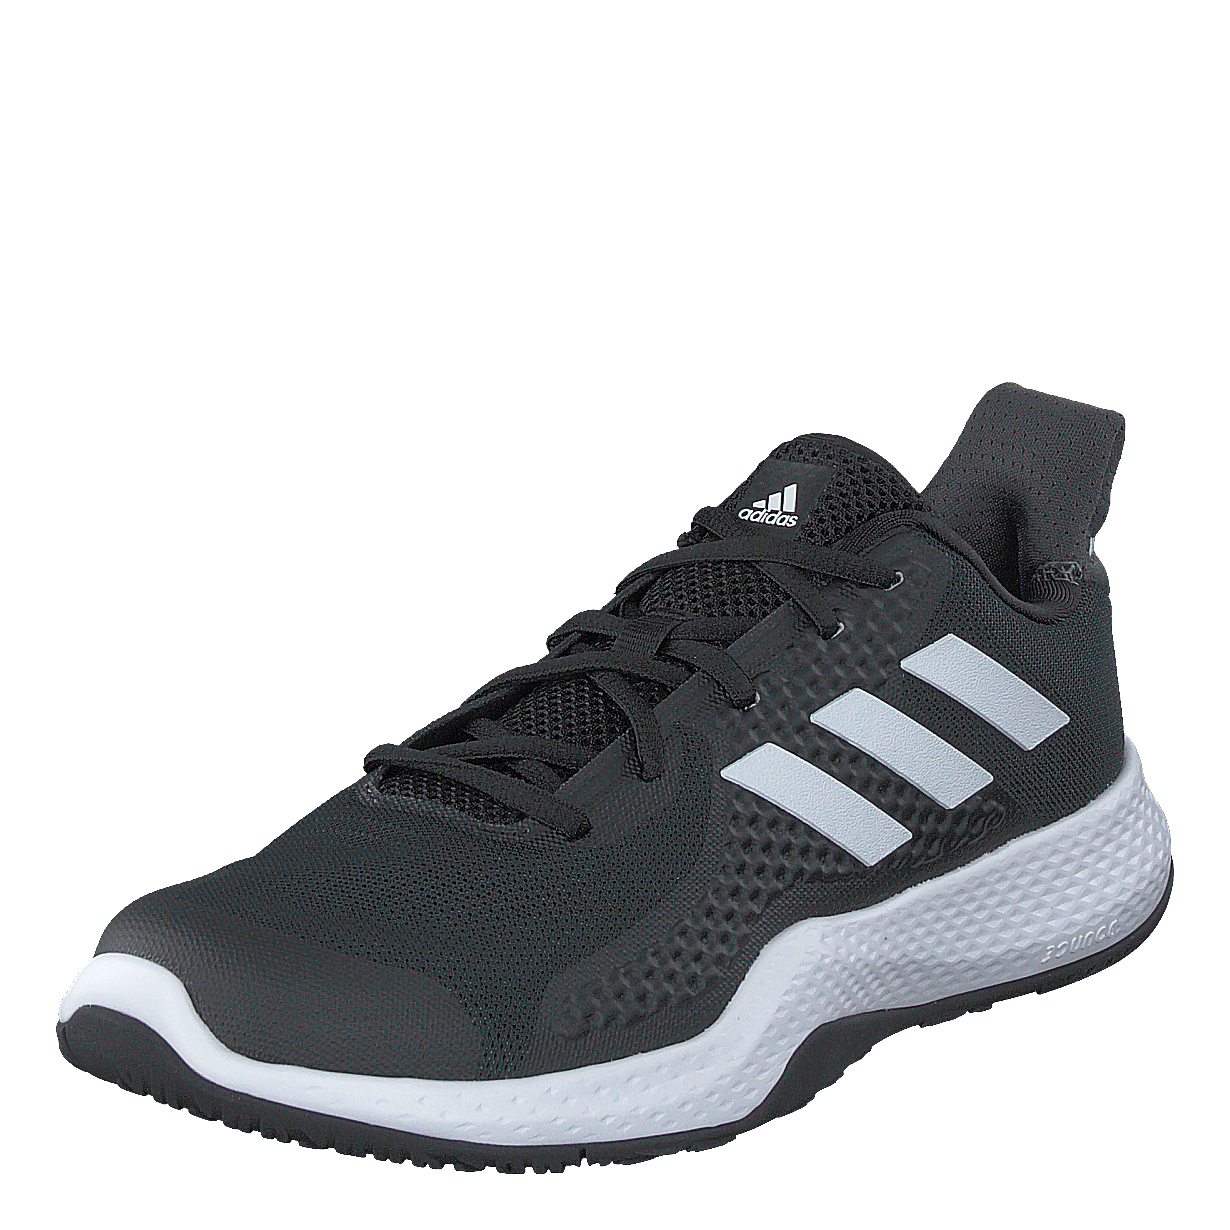 FitBounce Trainers Core Black / Ftwr White / Grey Six